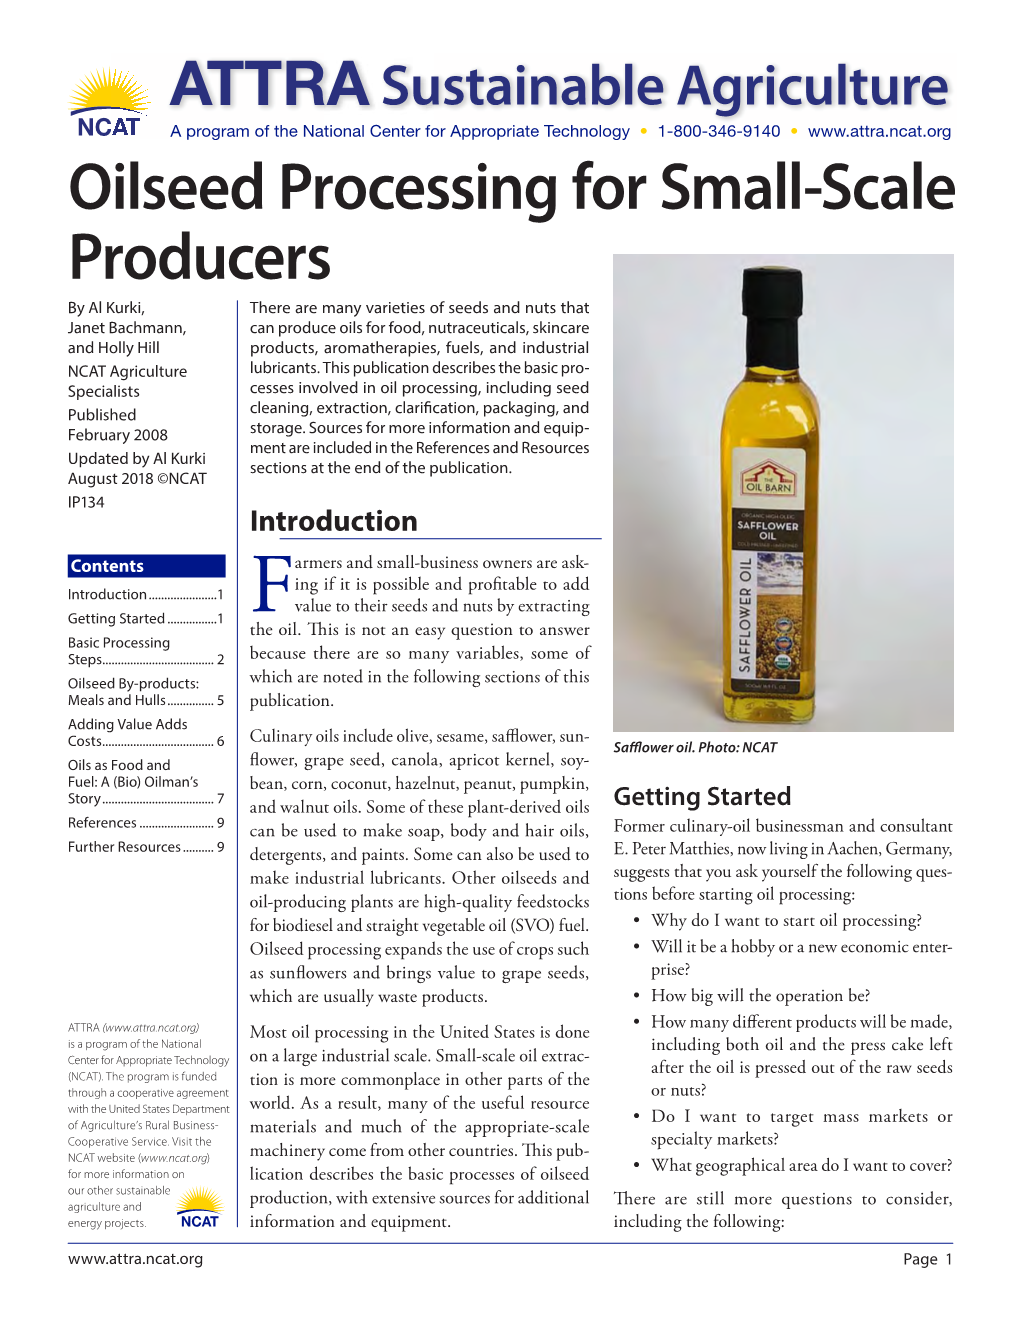 Oilseed Processing for Small-Scale Producers